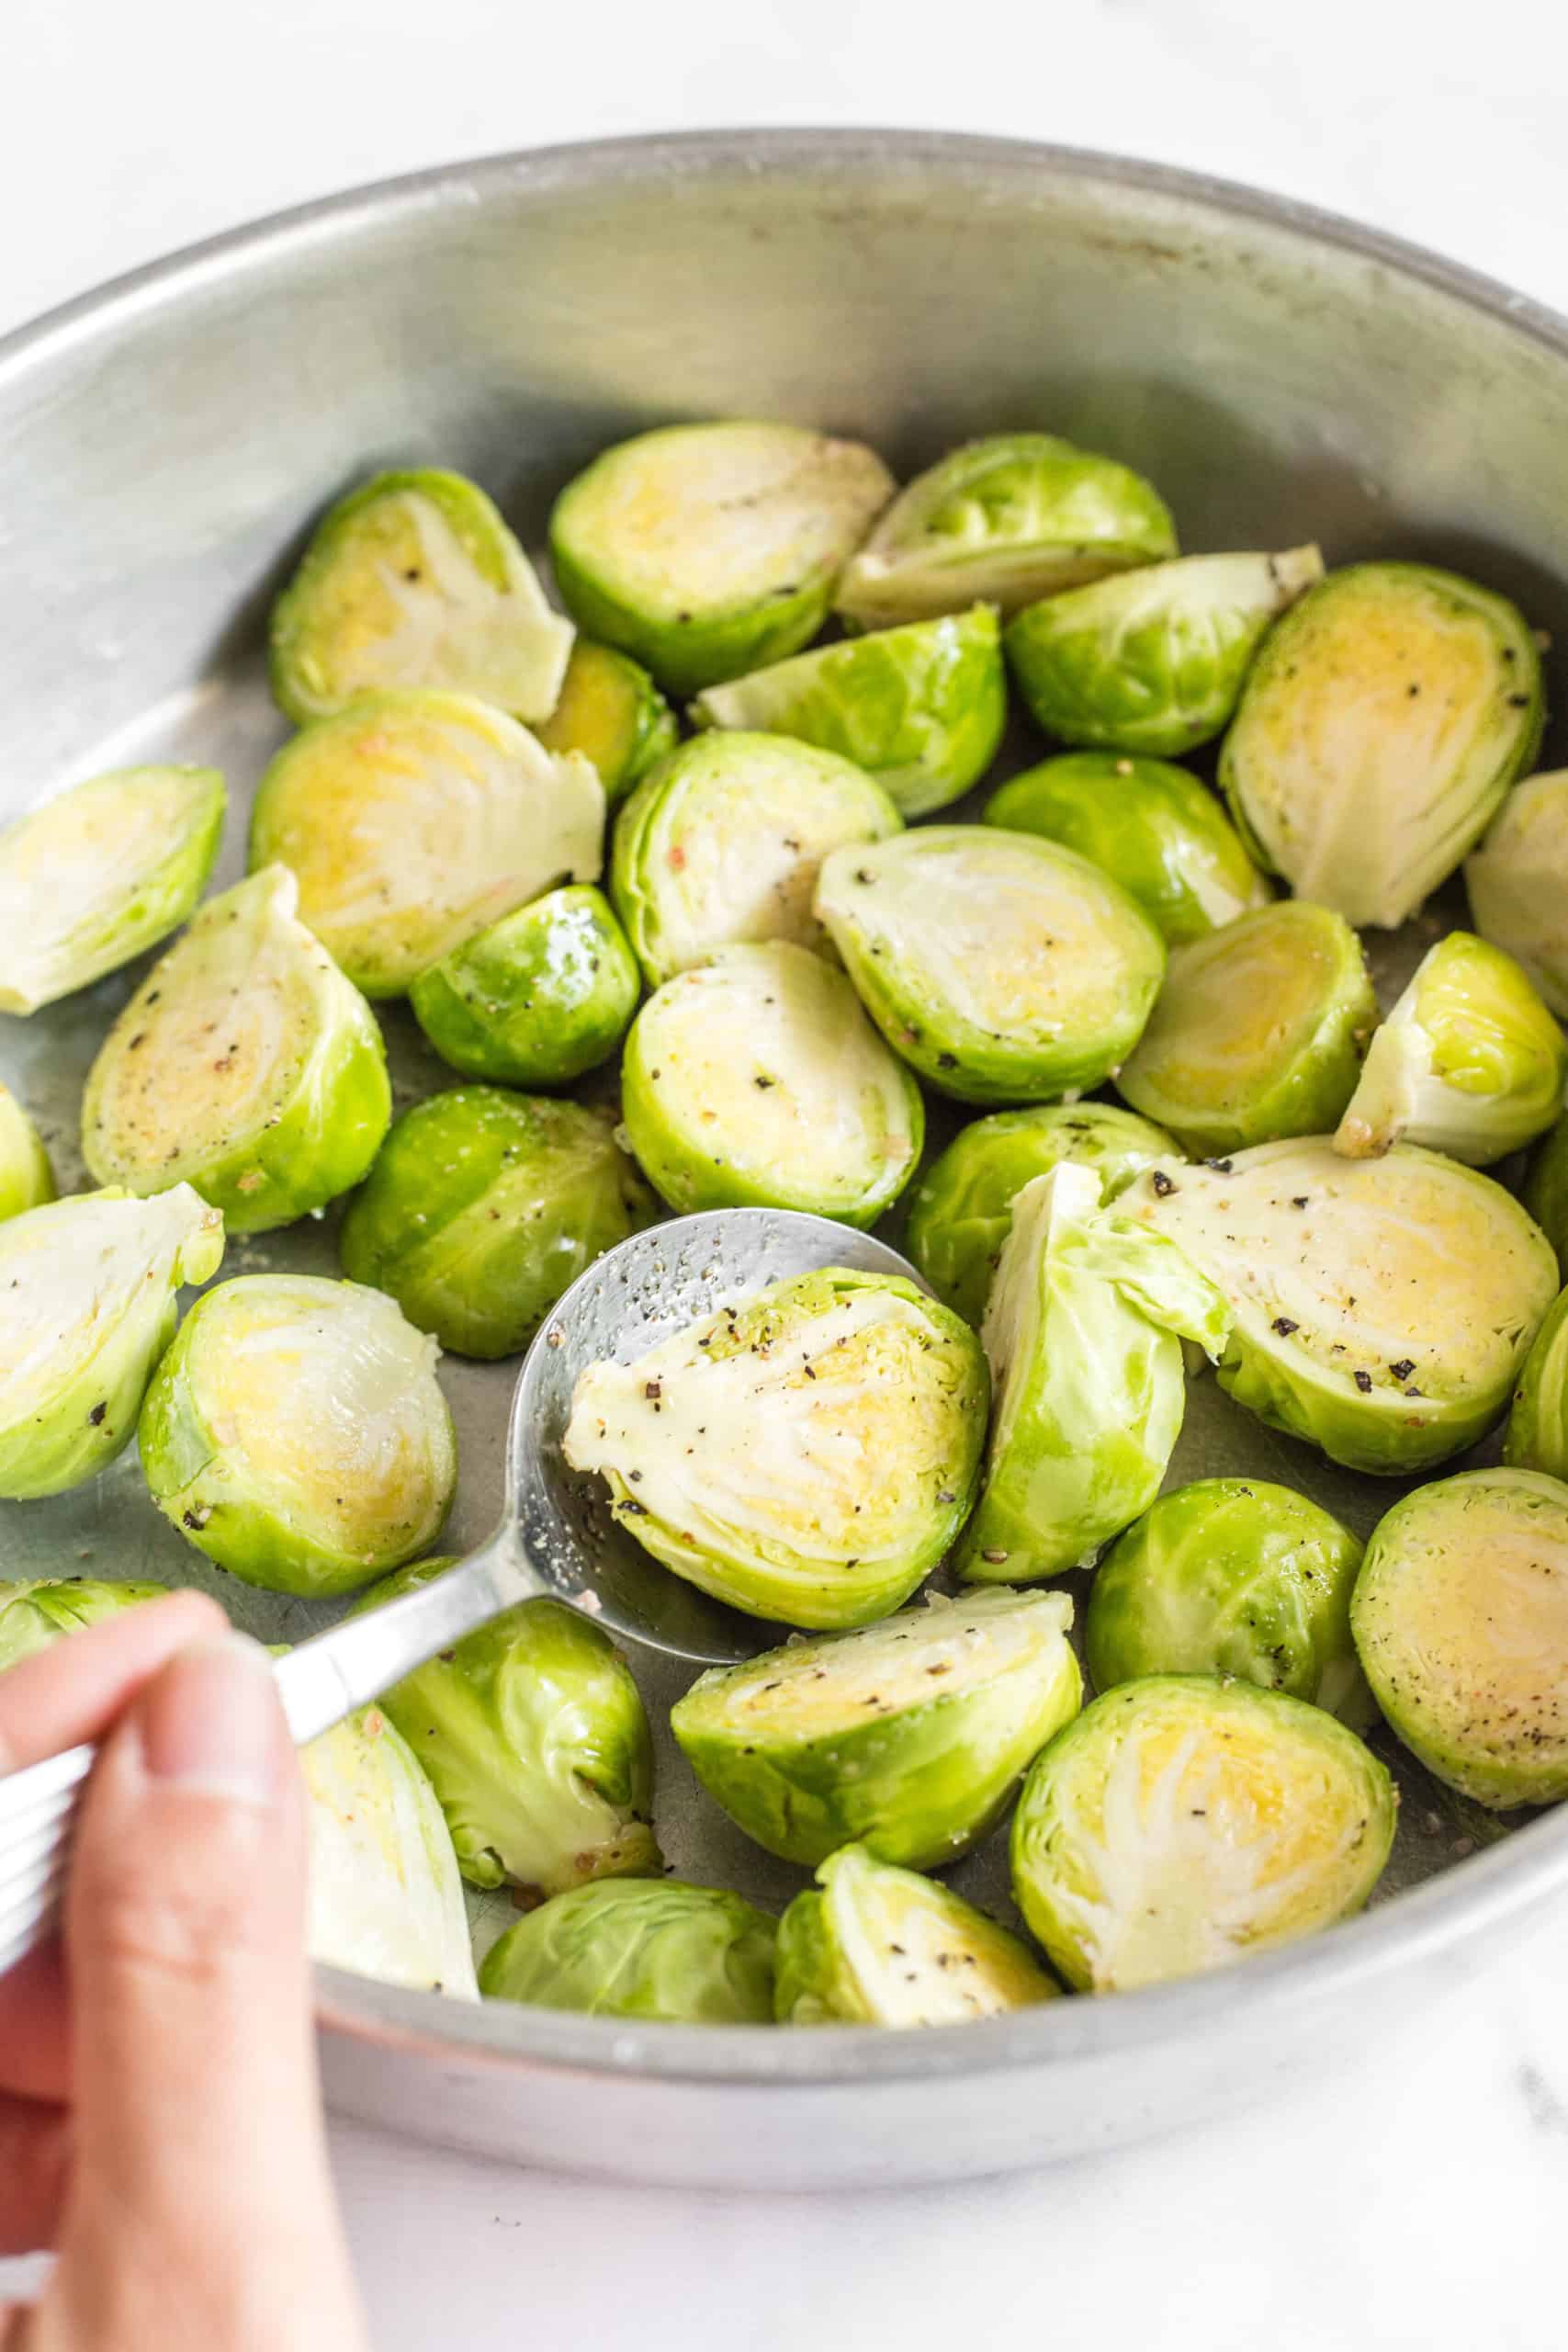 Tossing Brussels sprouts together with oil, salt and pepper in a mixing bowl.